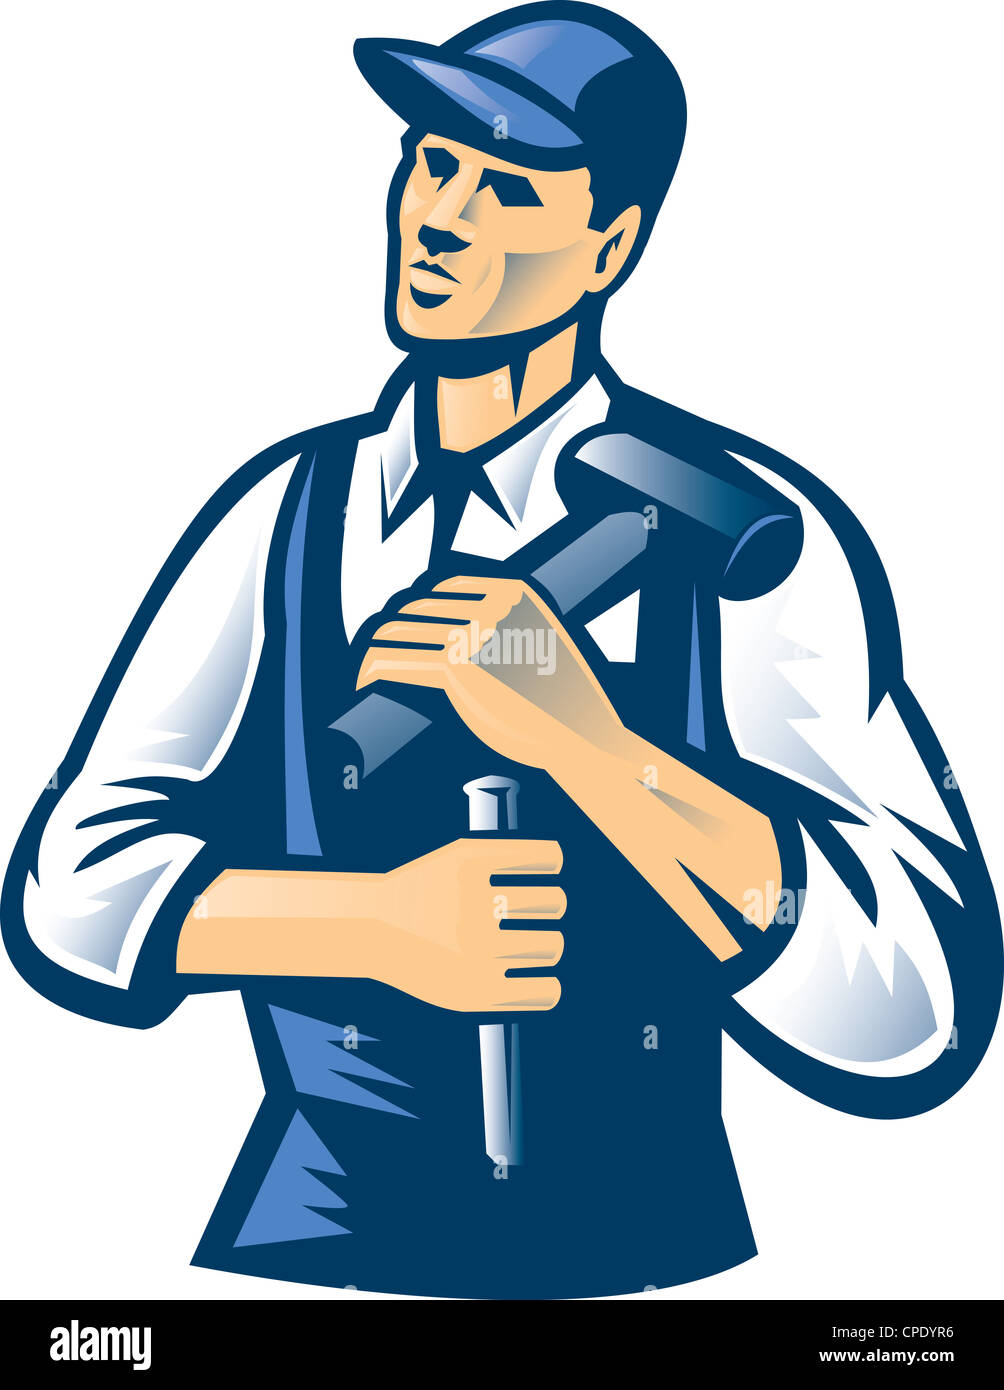 Illustration of a carpenter wearing hat with hammer and cold chisel looking up done in retro style. Stock Photo